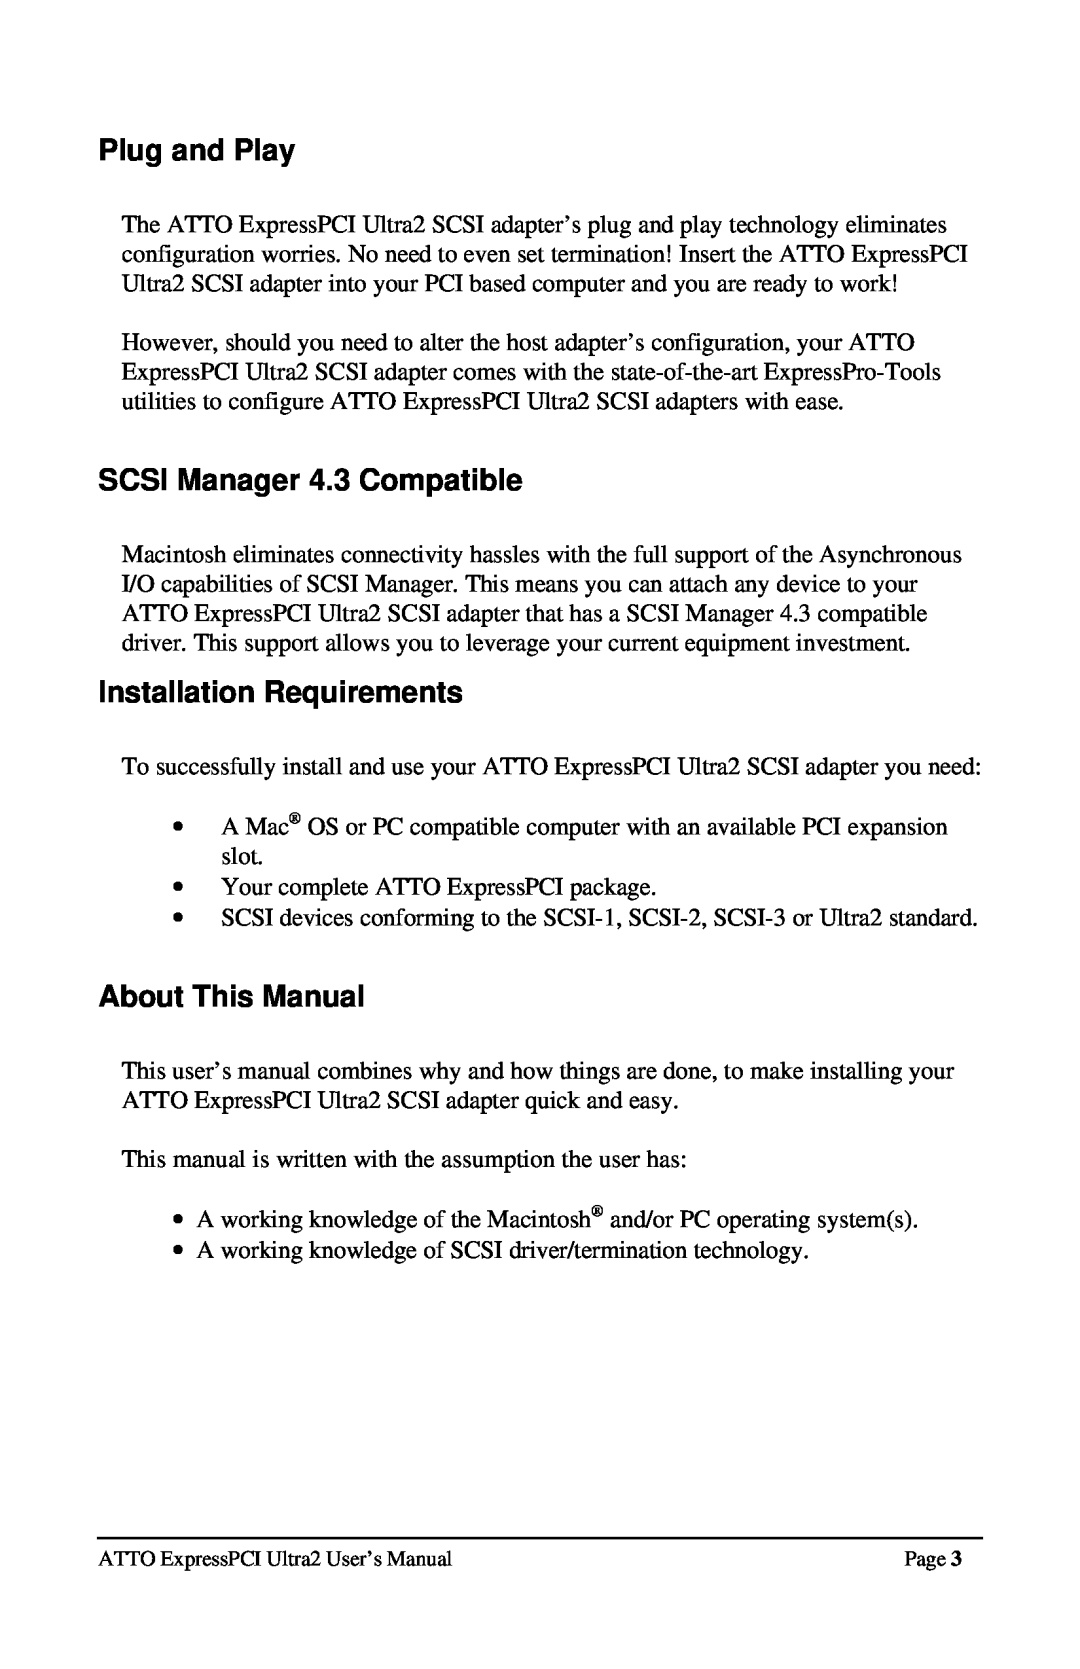 ATTO Technology UL25, UL2D Plug and Play, SCSI Manager 4.3 Compatible, Installation Requirements, About This Manual 